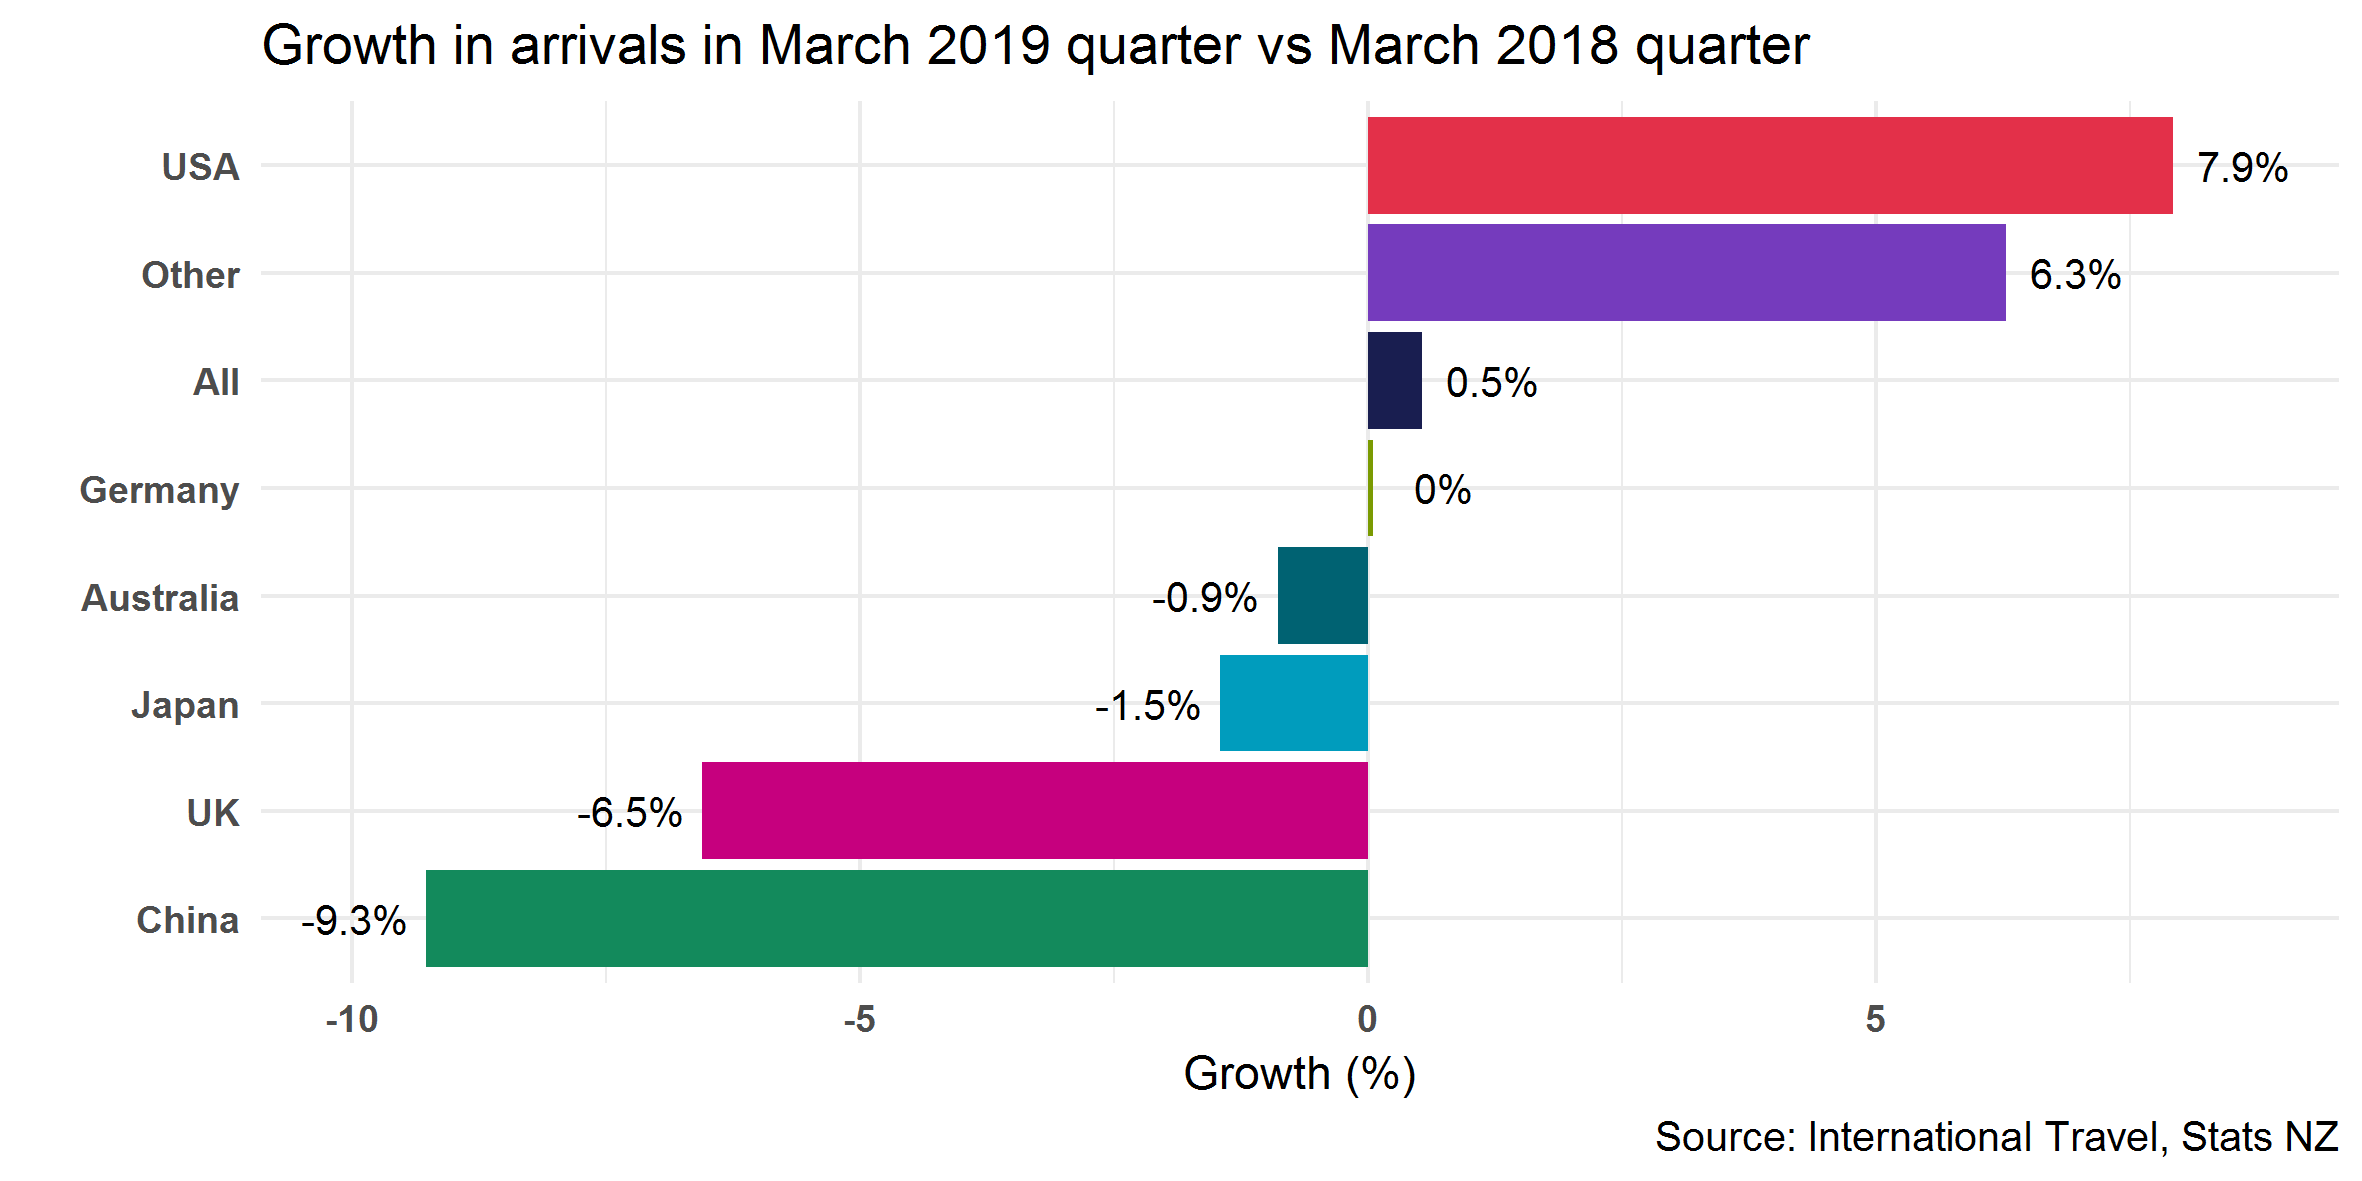 Growth in arrivals in March 2019 quarter vs March 2018 quarter